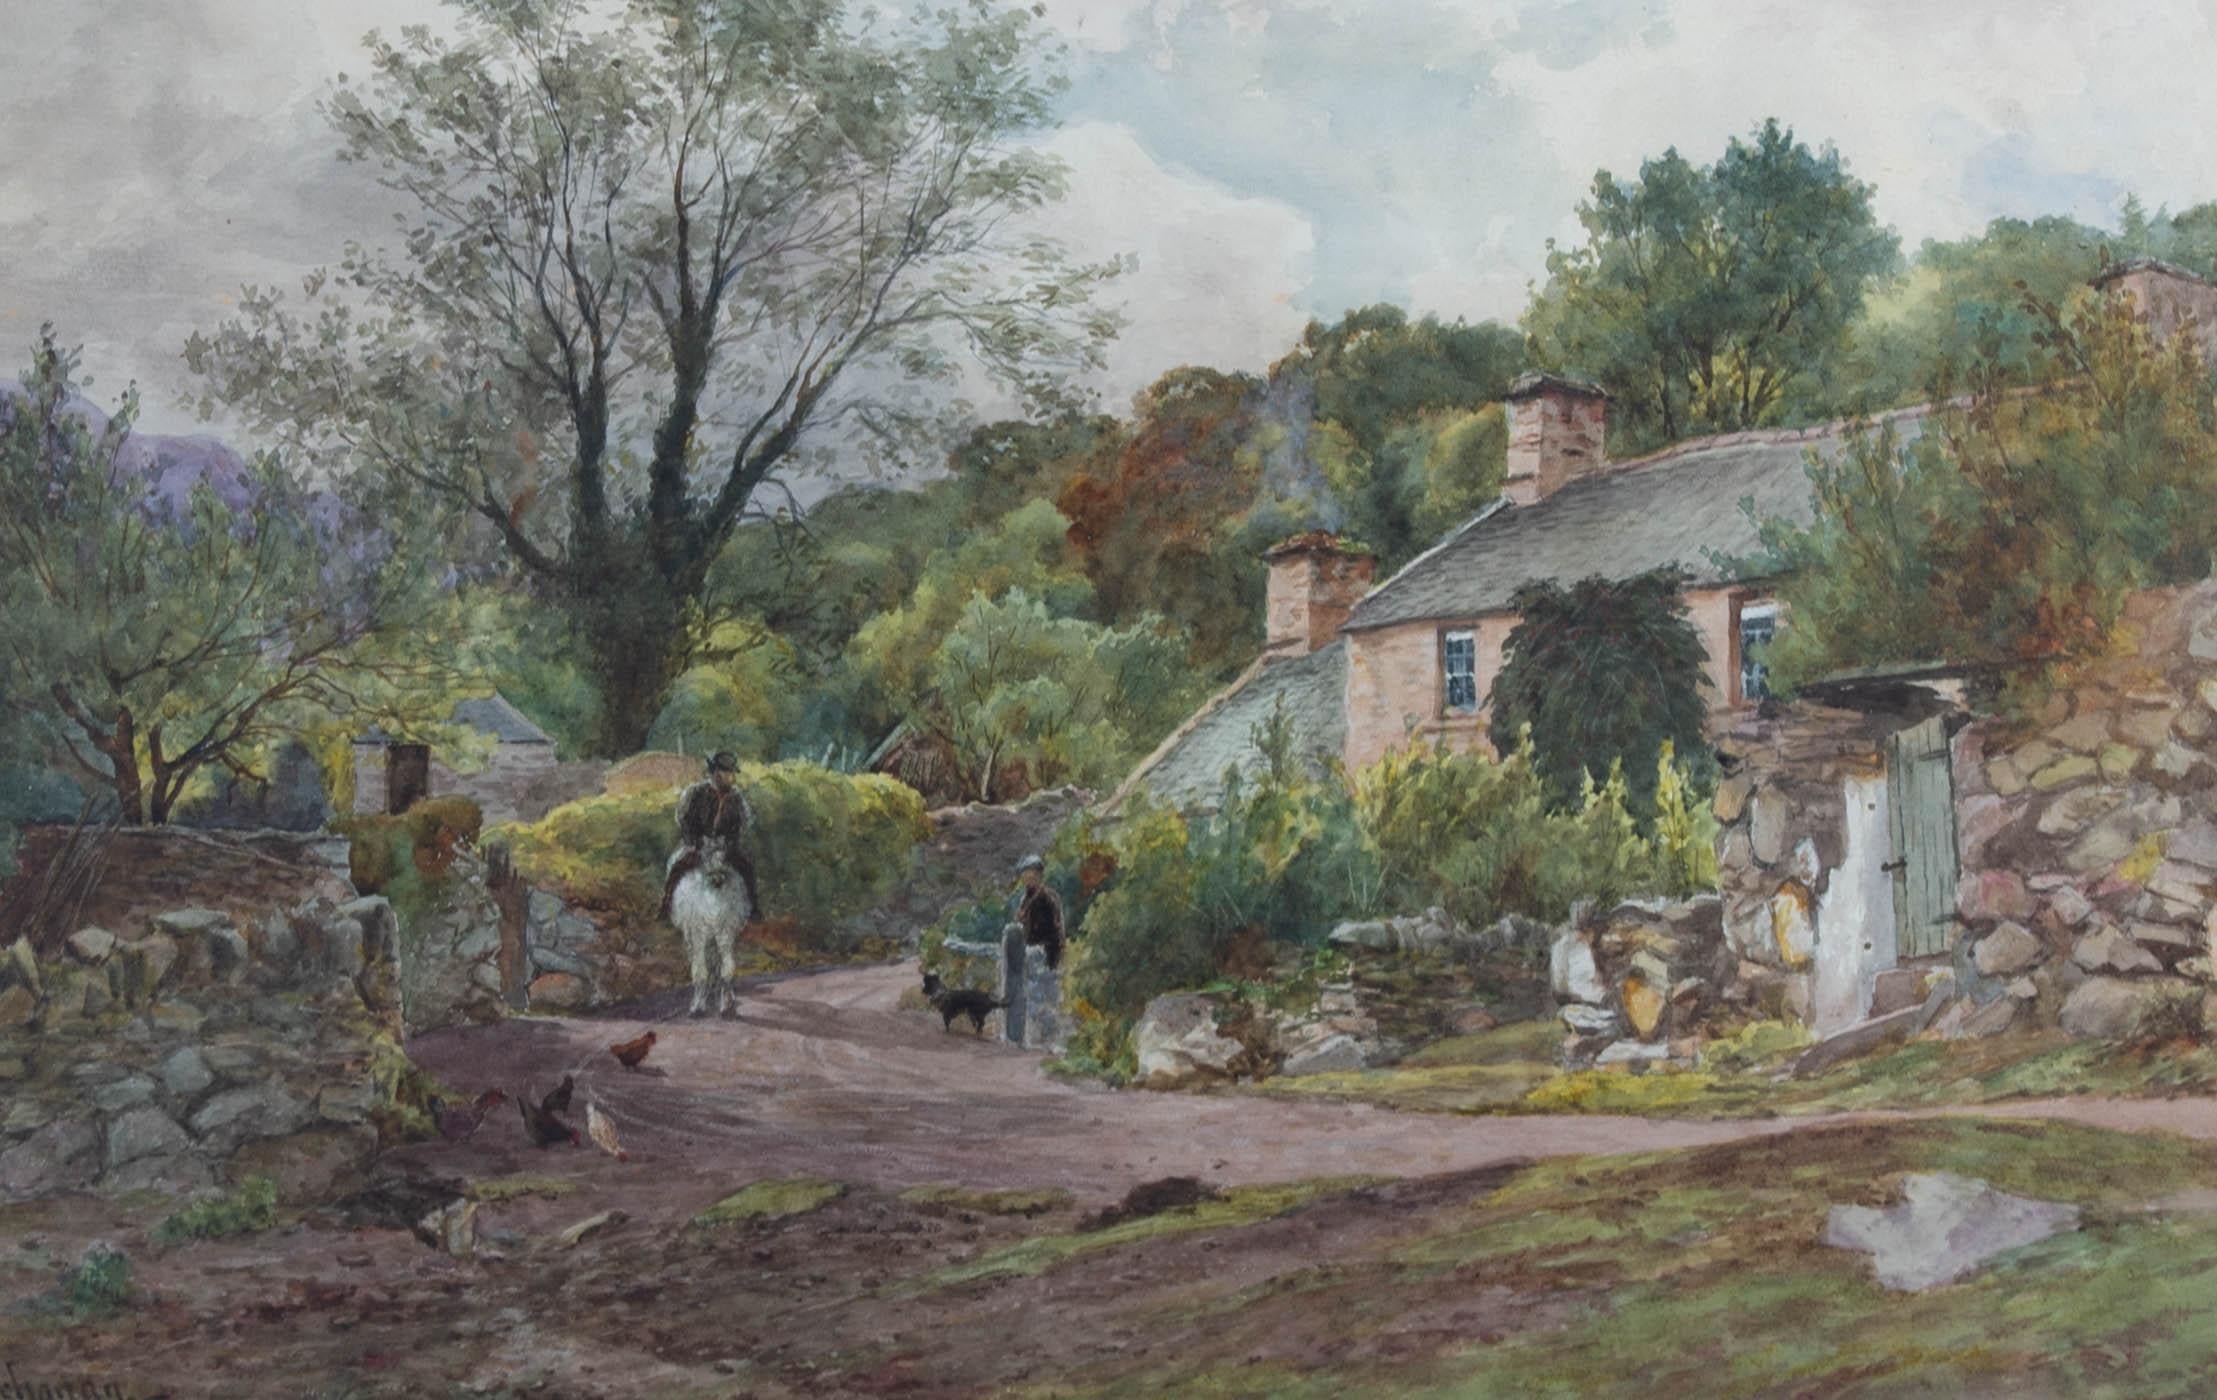 This well-executed watercolour study depicts a man on his horse stopping to talk to another man at a garden wall. In the foreground chickens wander near the dry stone walls before a cottage. Painted in fine detail, the artist has captured the